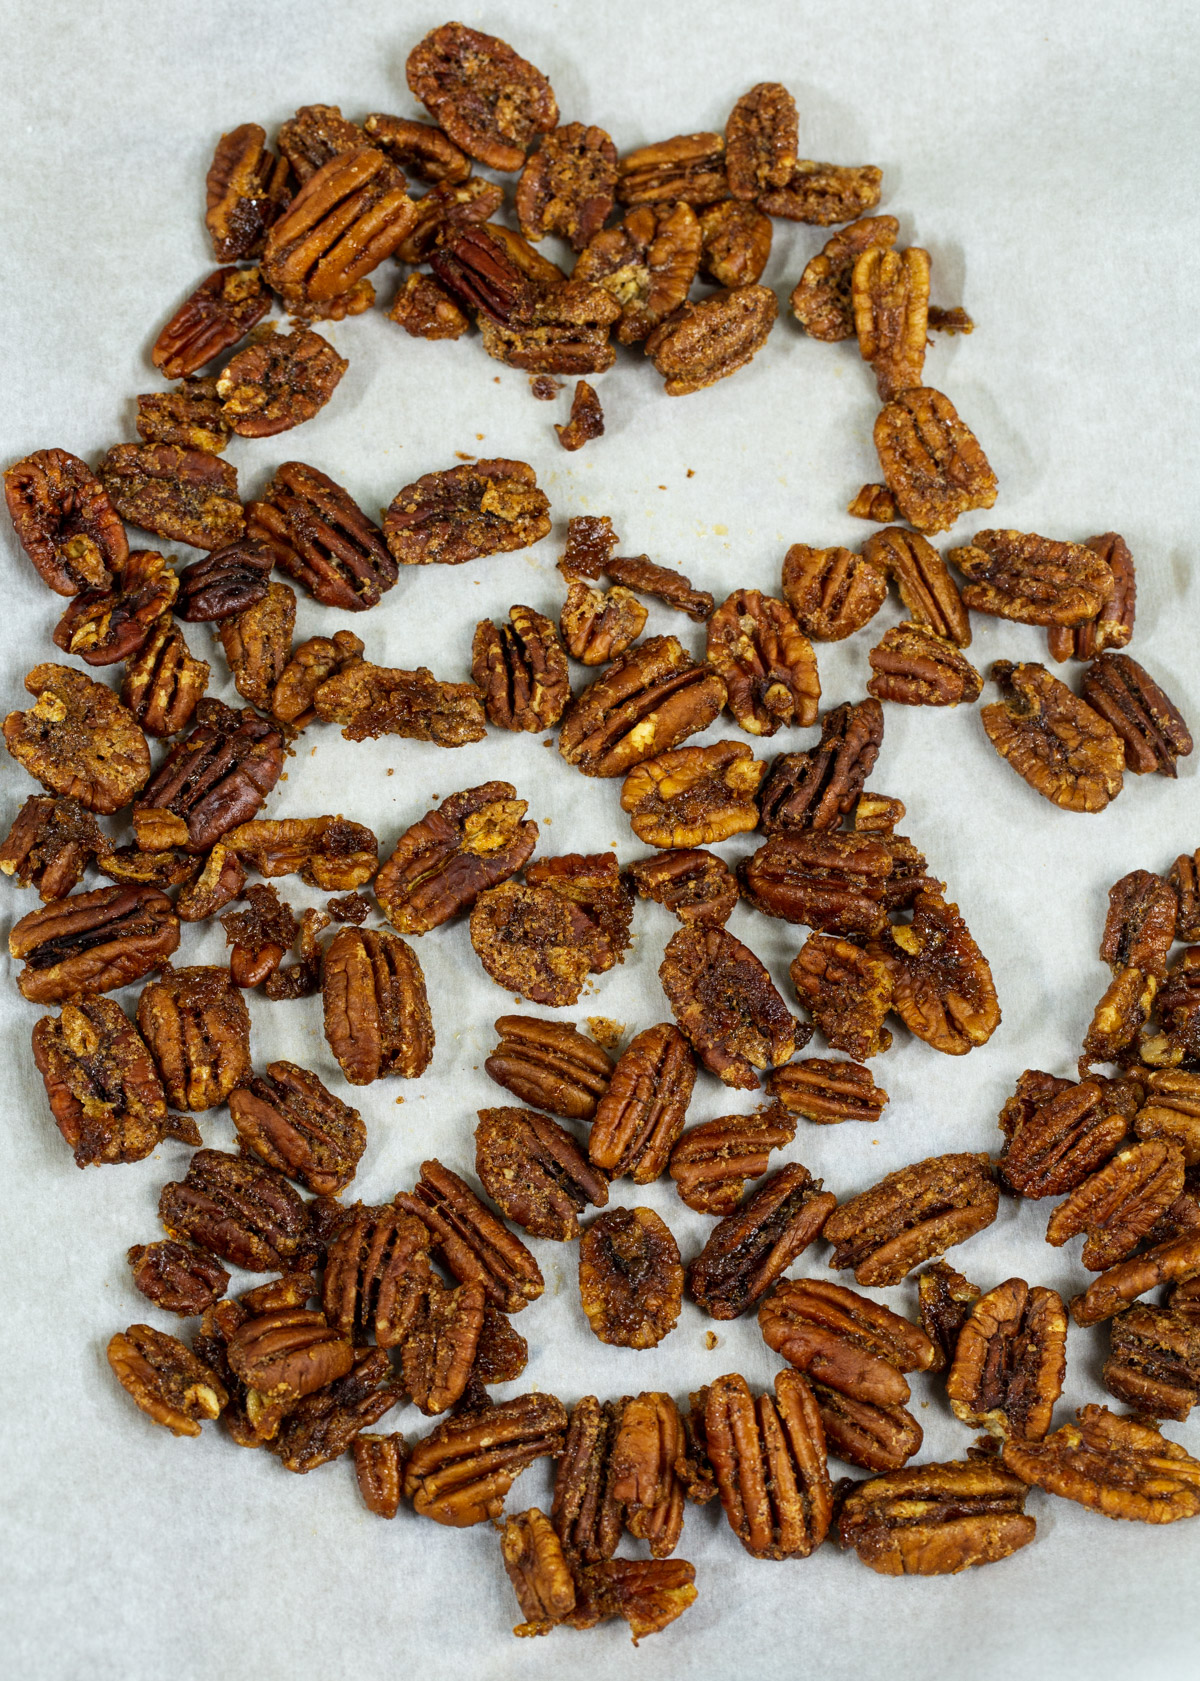 Glazed pecans spread out on parchment paper.